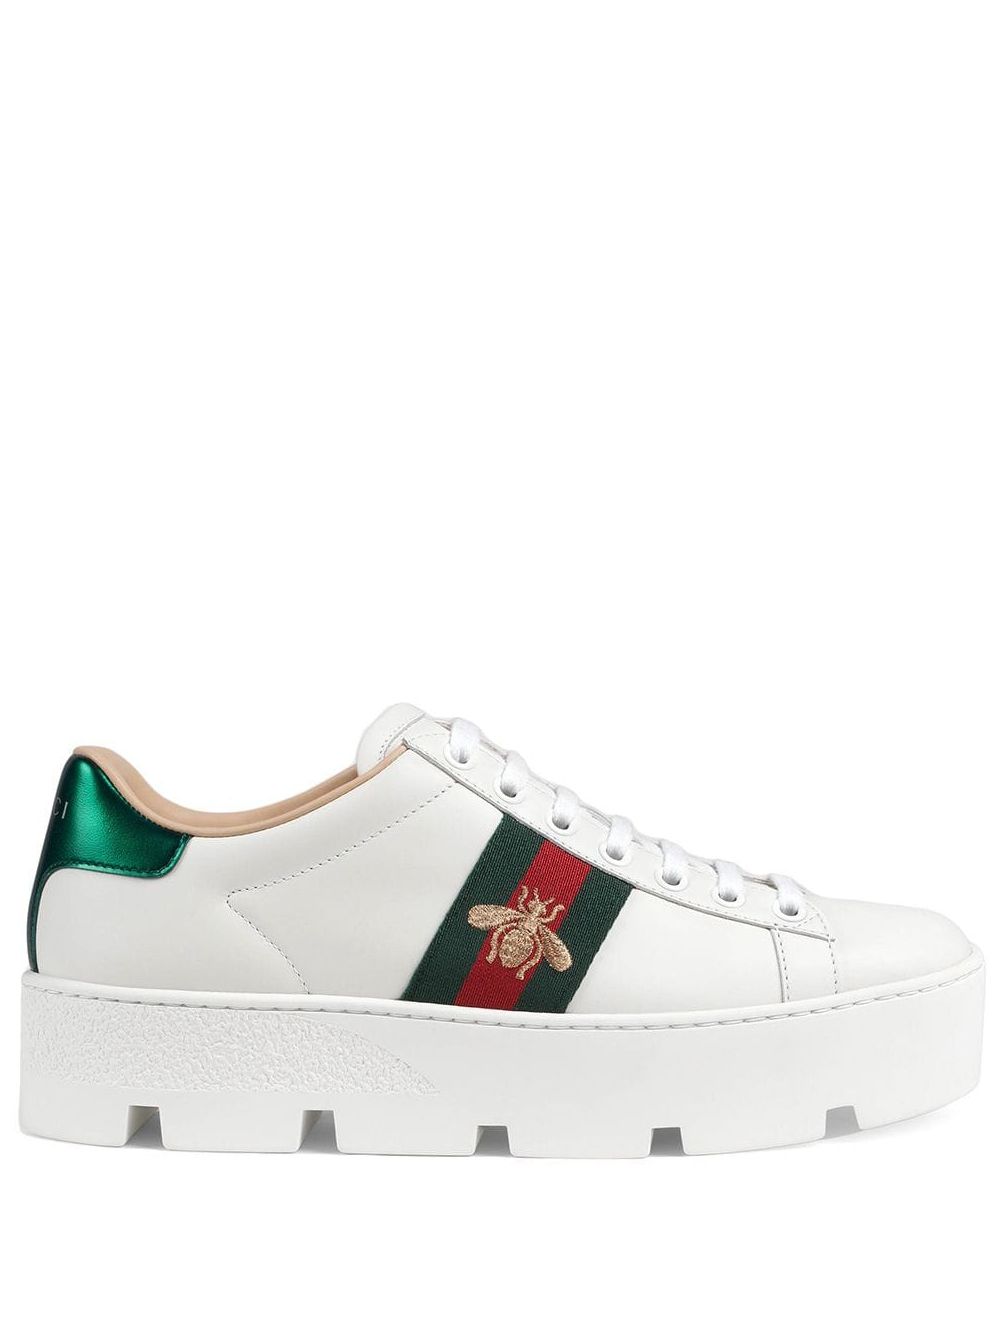 Gucci Ace embroidered platform sneaker 